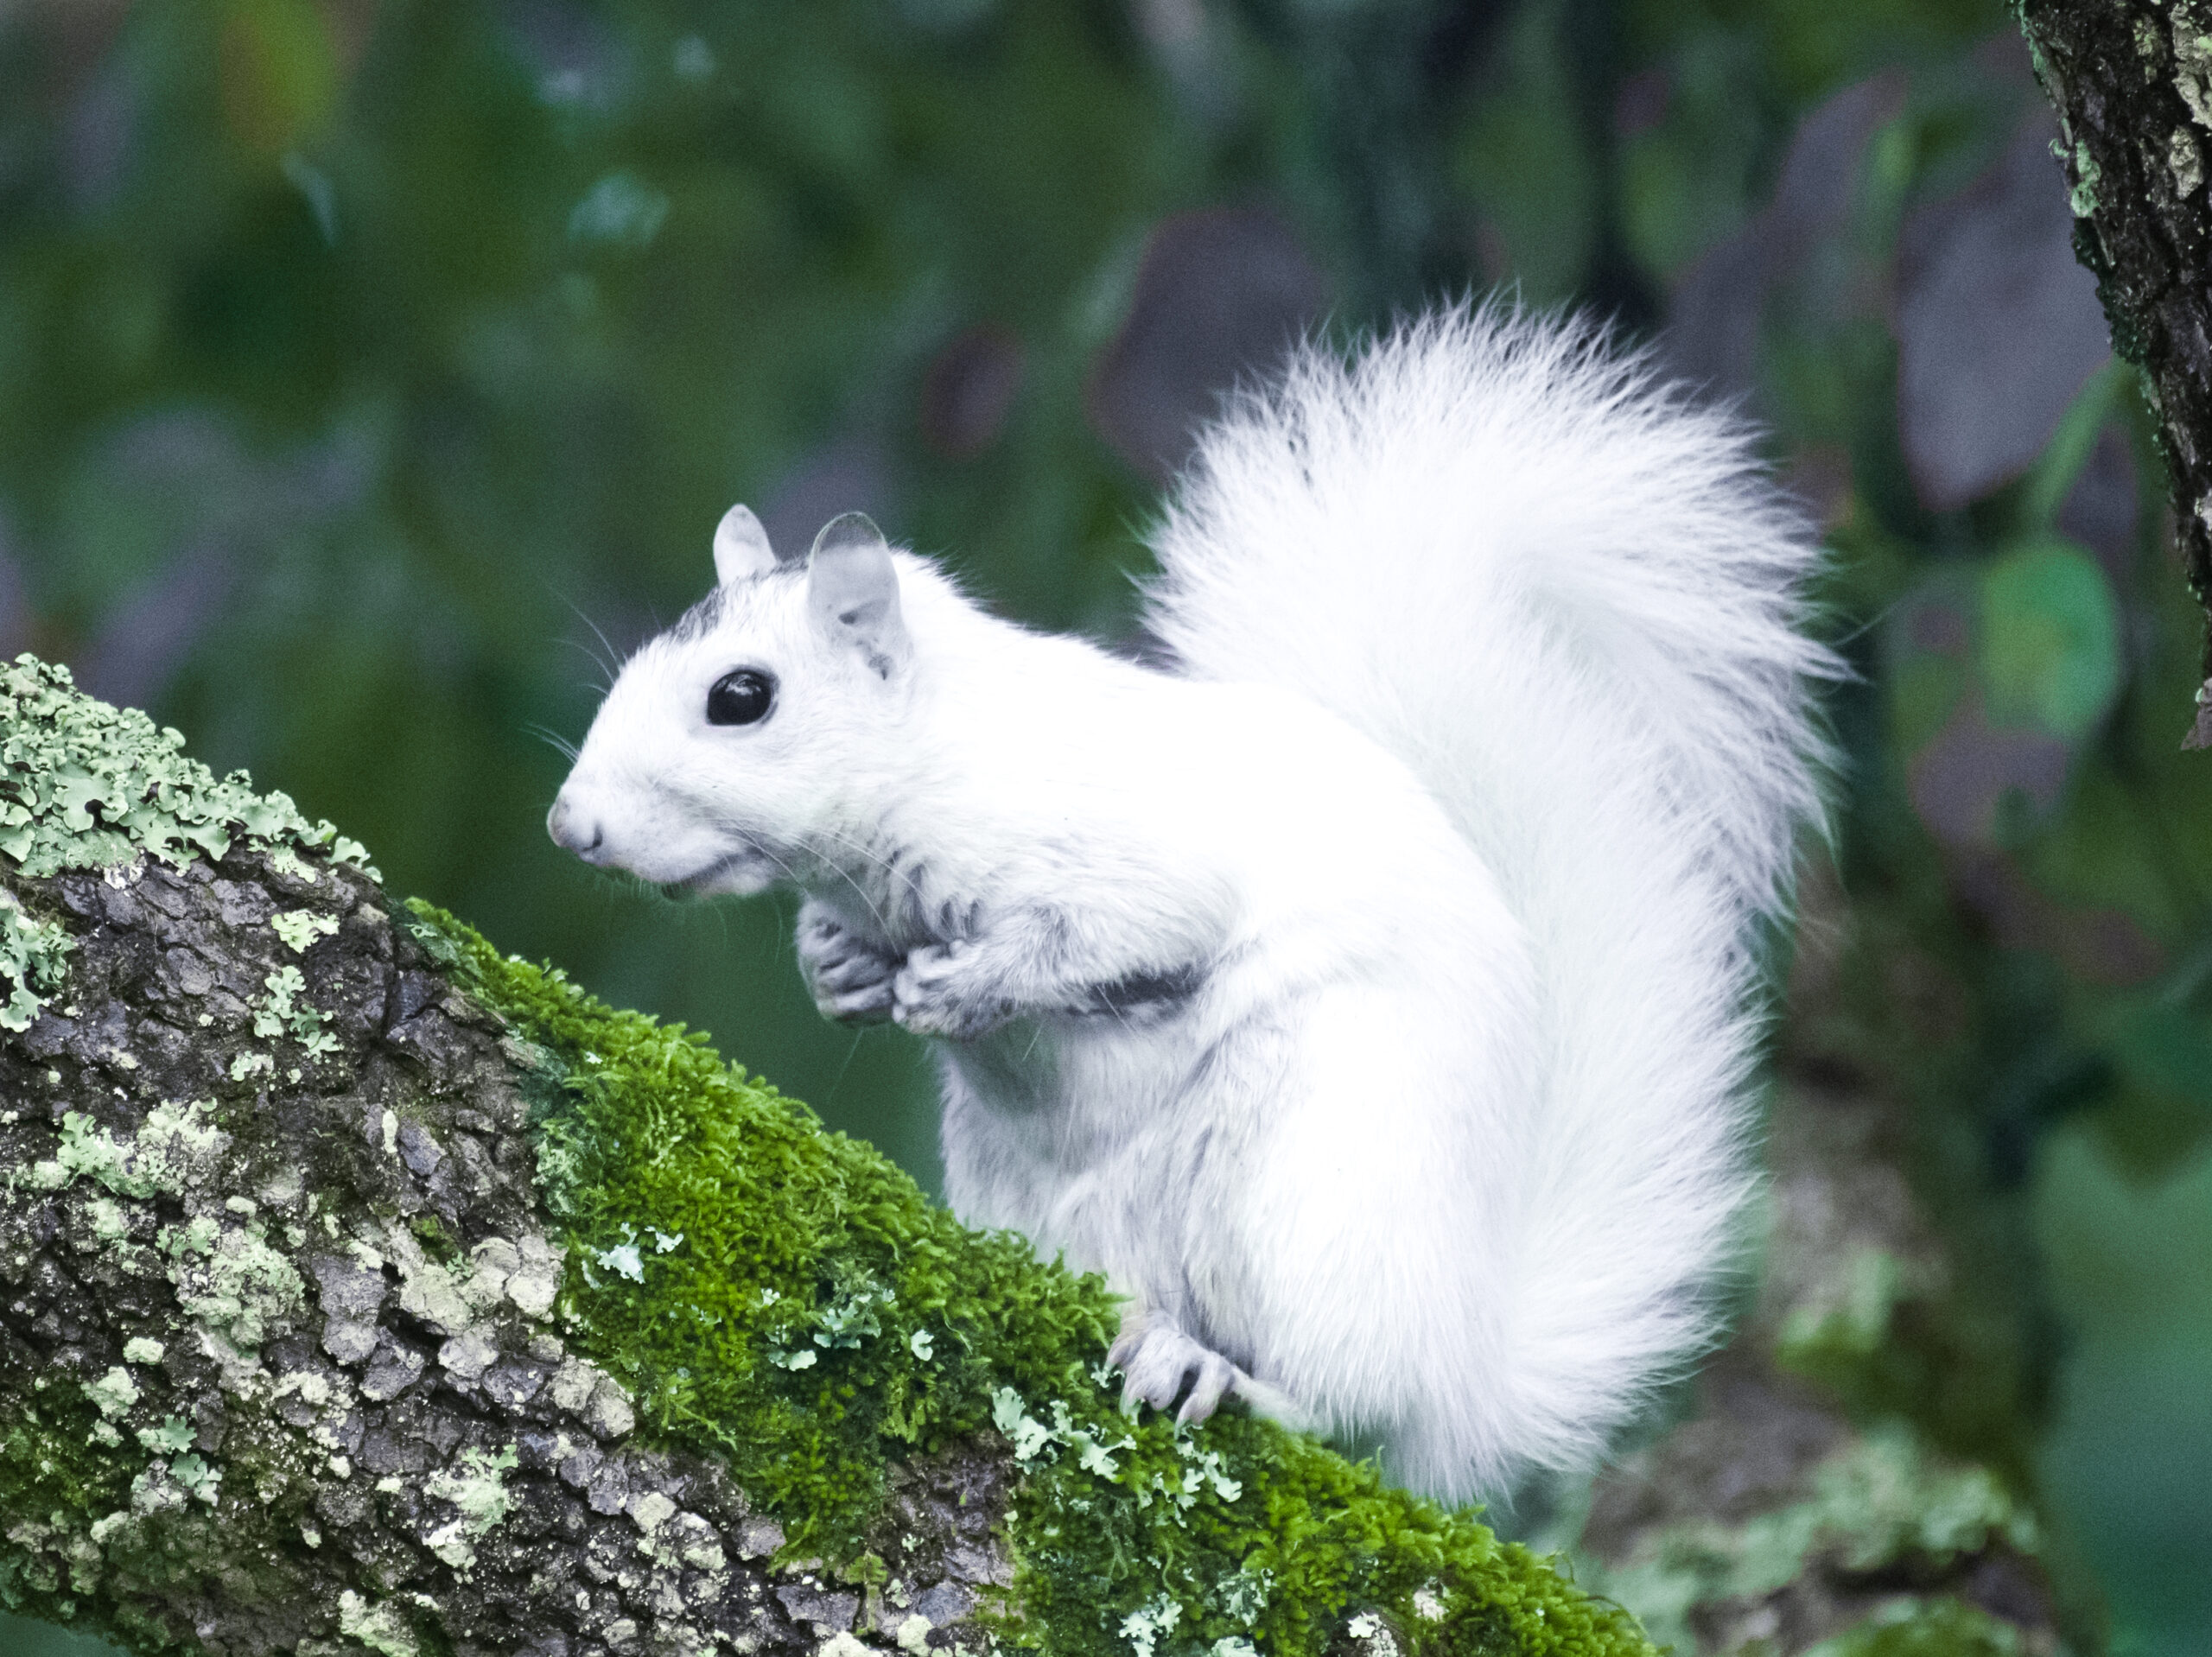 The White Squirrels of Brevard Transylvania County Library